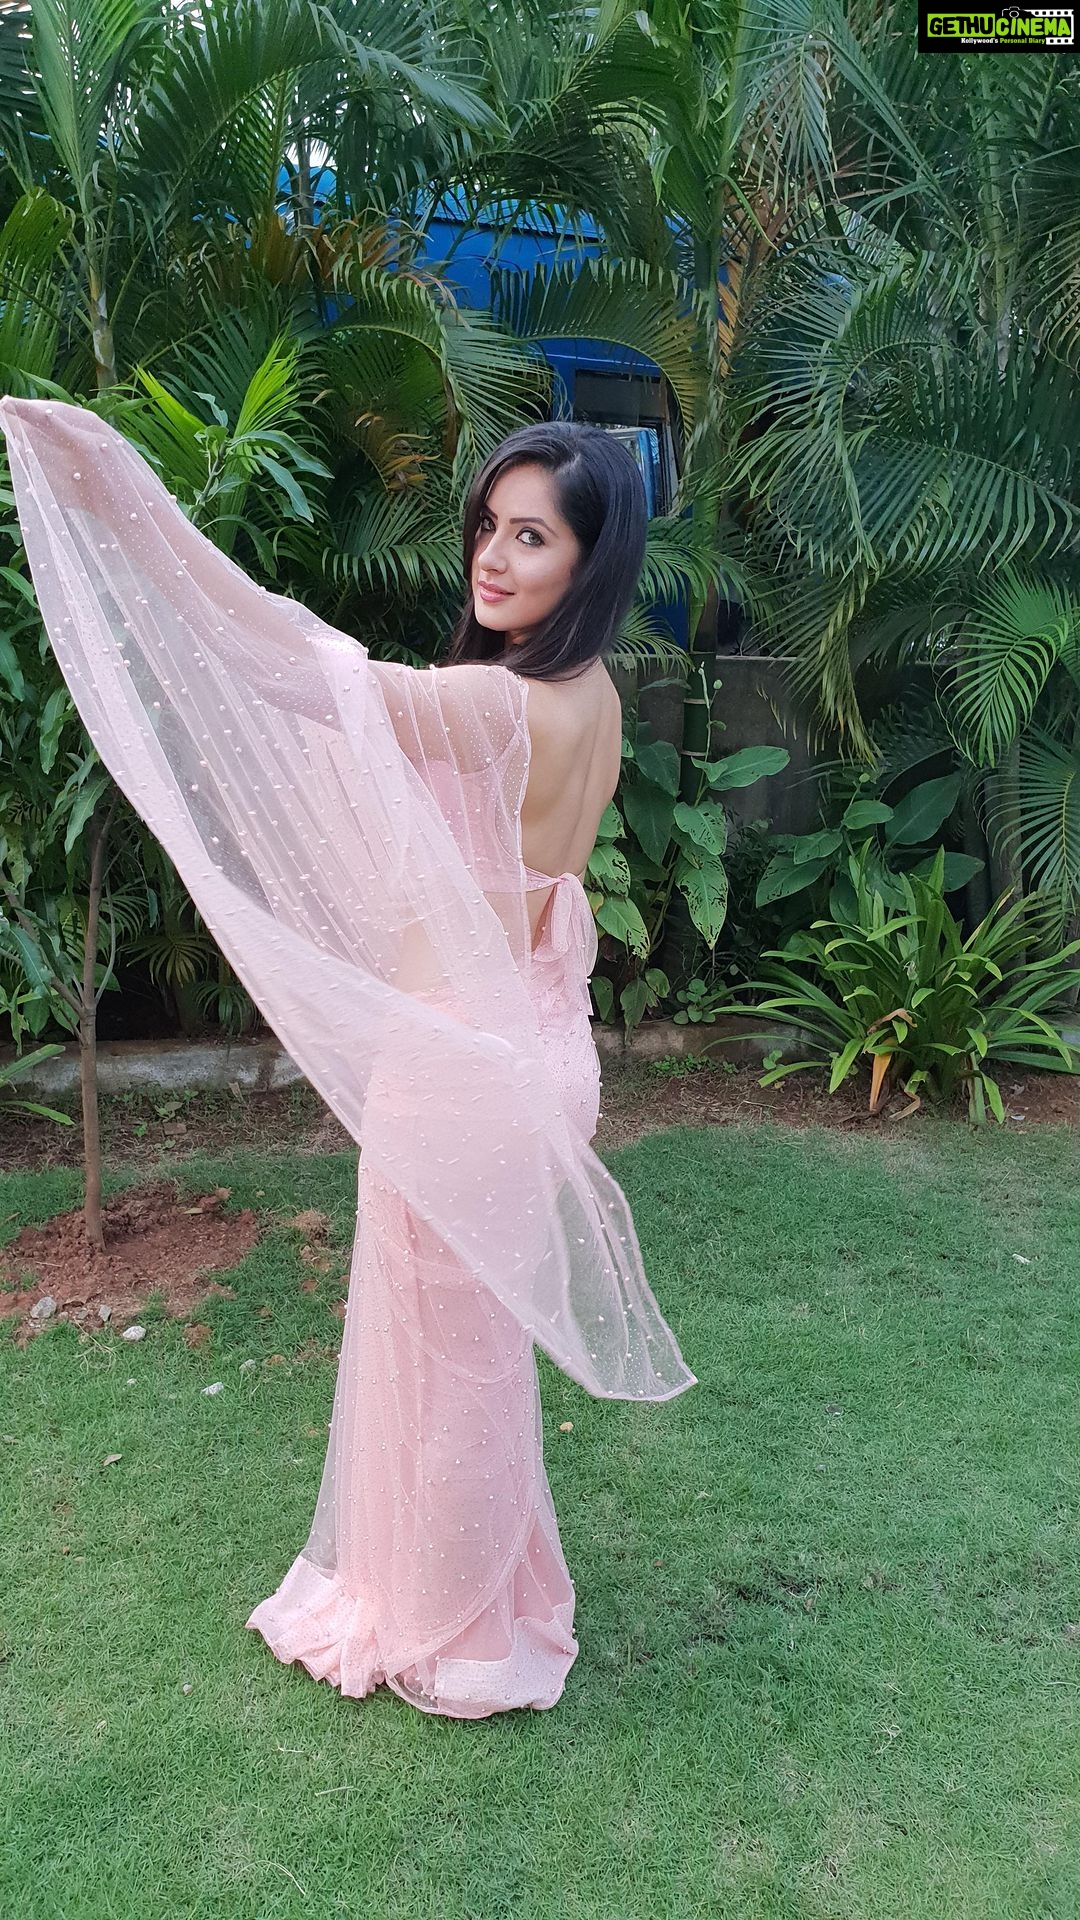 Pooja Bose Xxx Video - Actress Pooja Bose HD Photos and Wallpapers August 2022 - Gethu Cinema